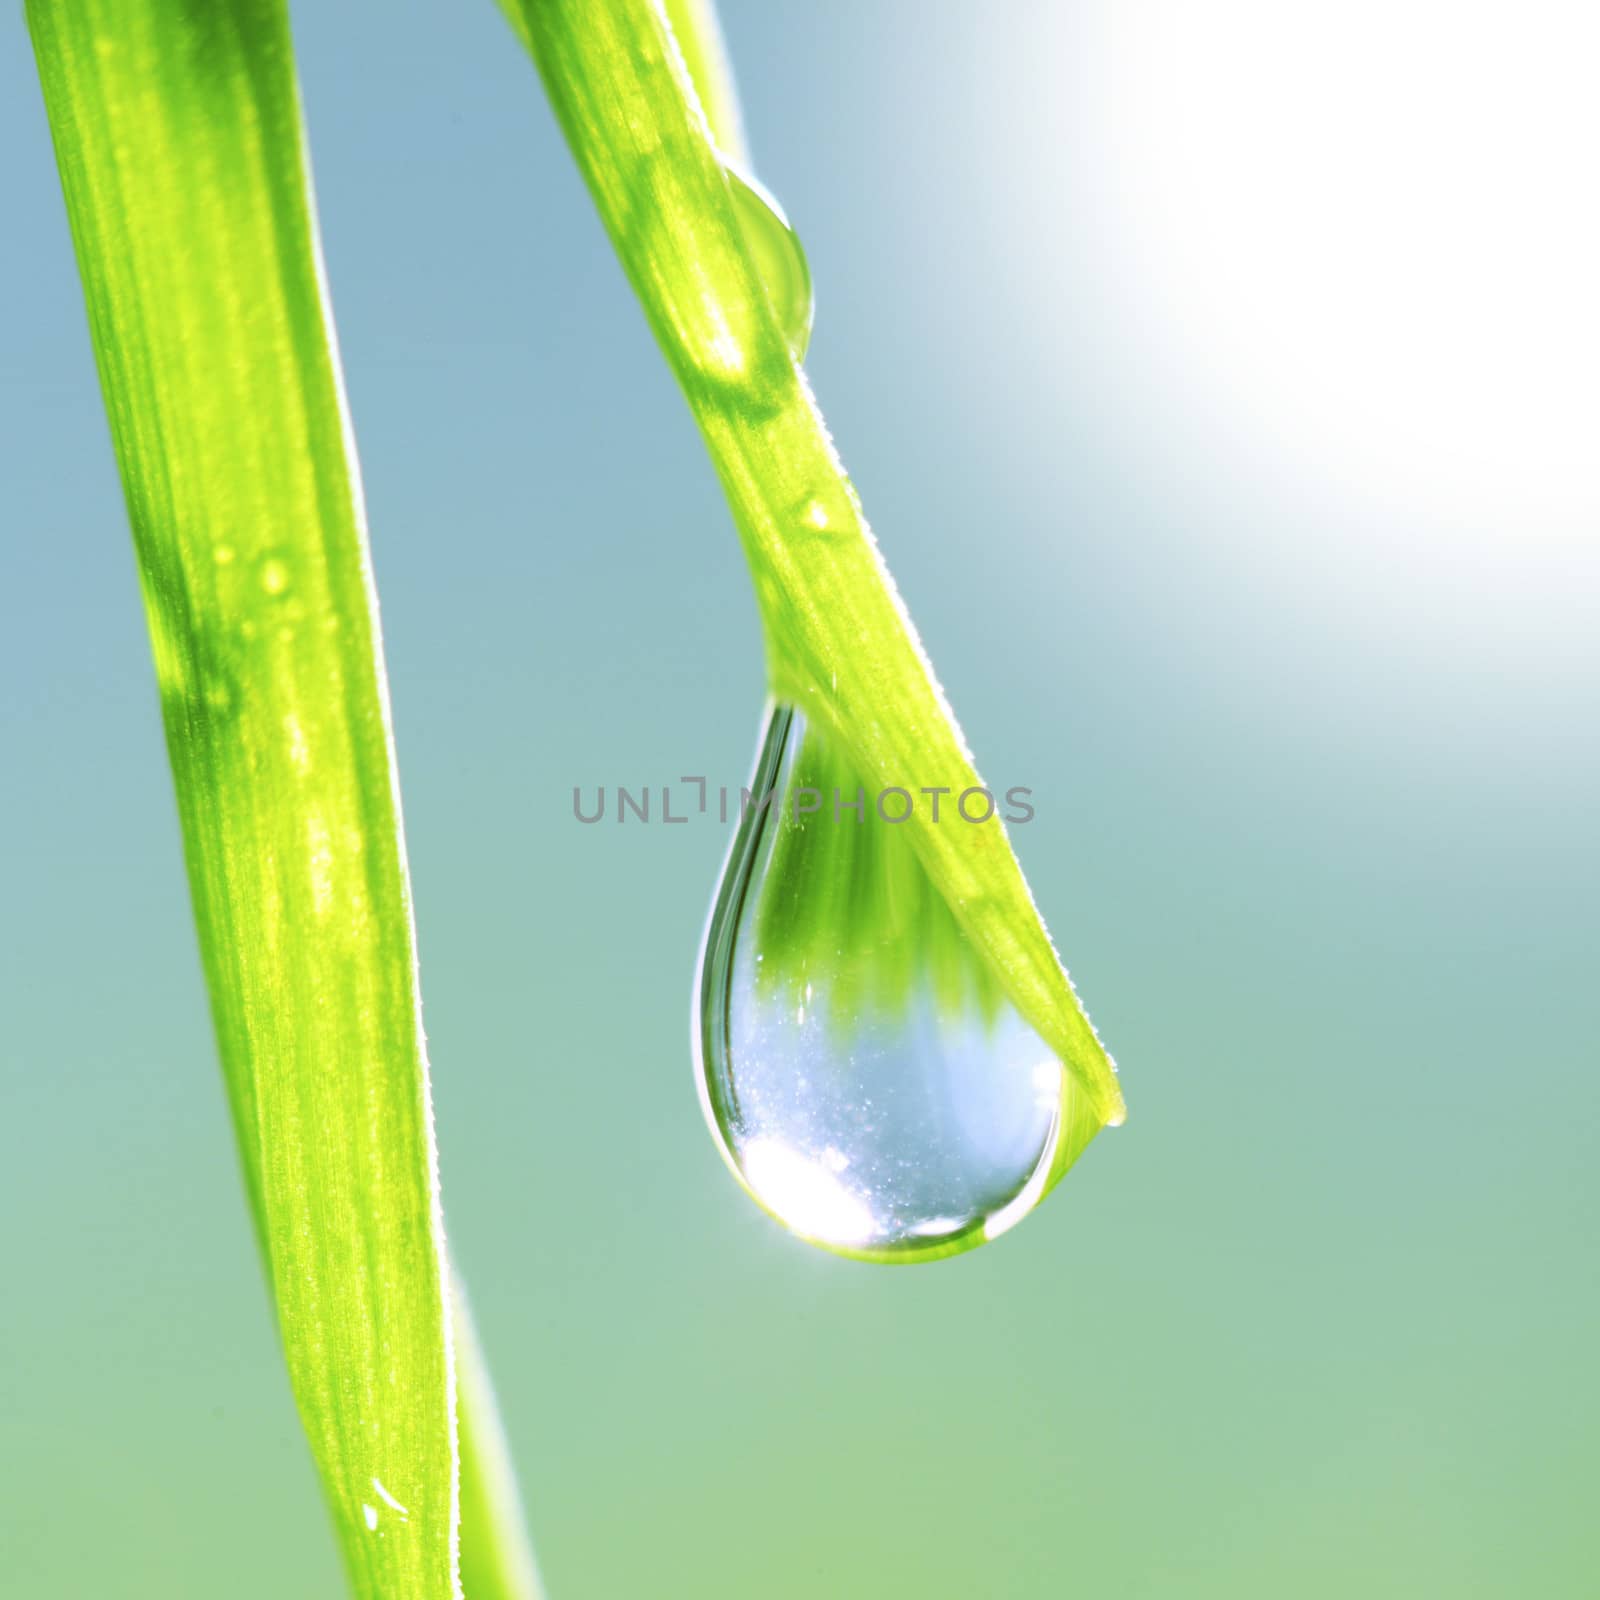 Grass with dew drop by Yellowj